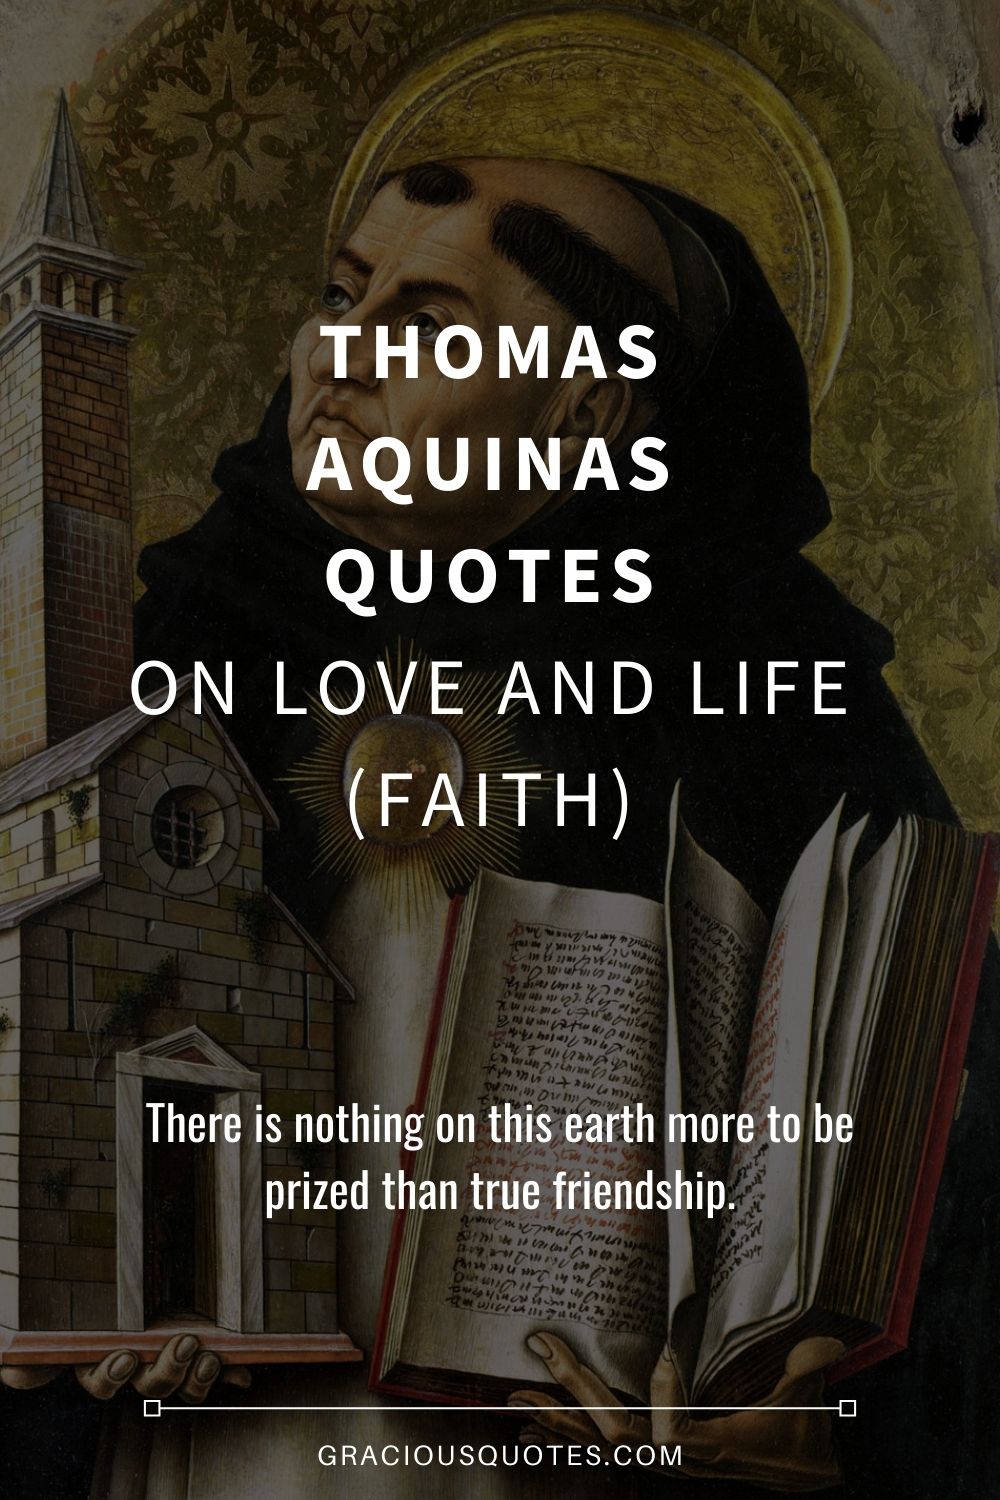 Thomas Aquinas Quotes on Love and Life (FAITH) - Gracious Quotes